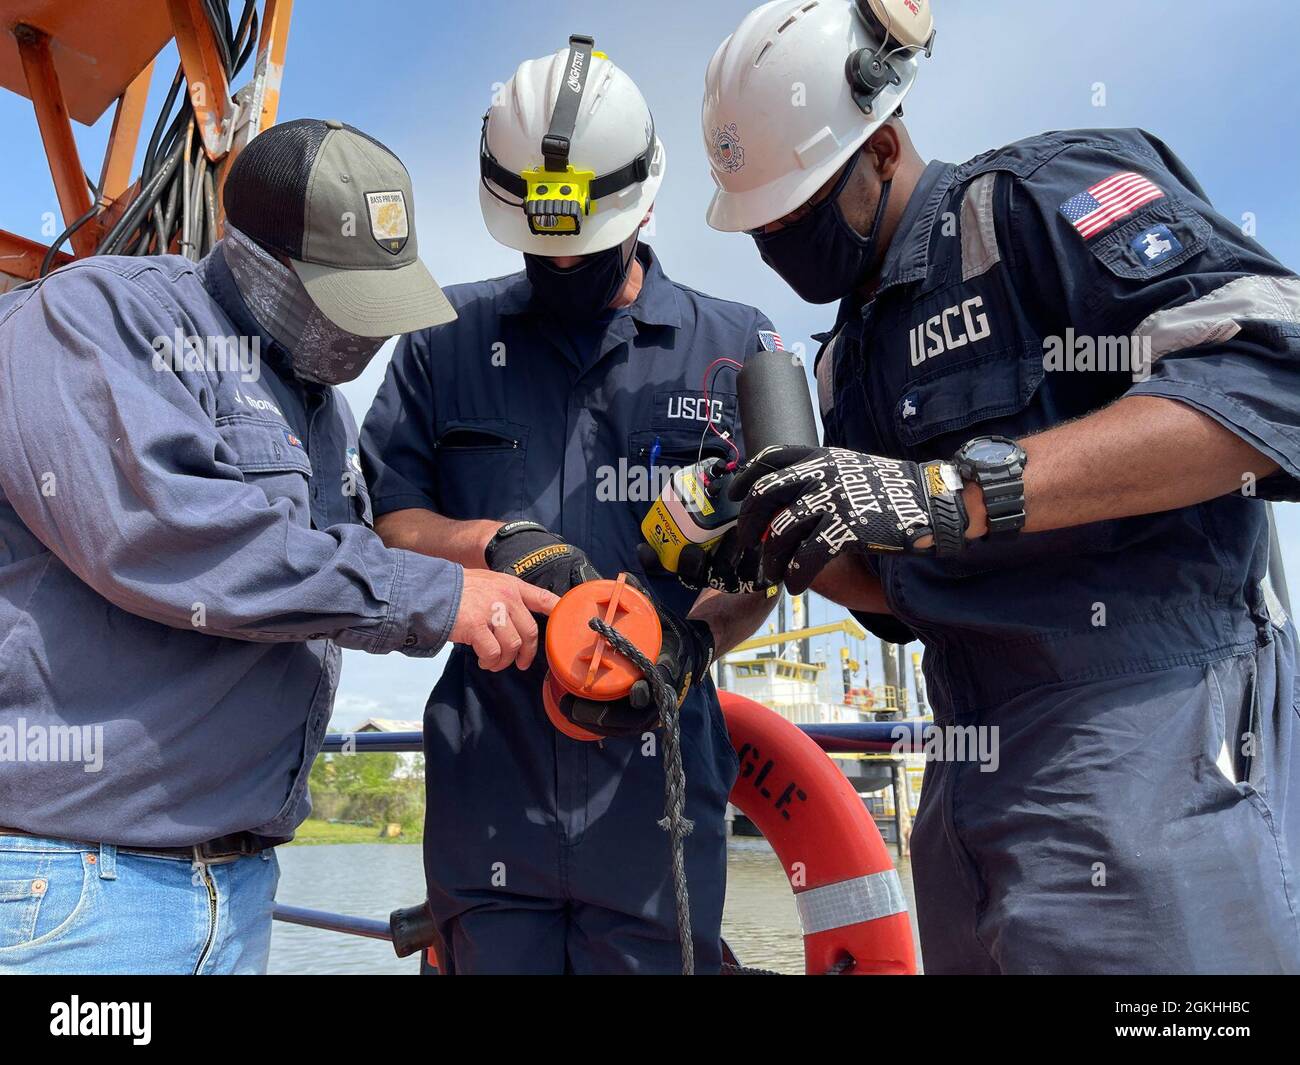 Coast Guard Marine Inspectors and a SEACOR Eagle crew member verify the battery in a life ring light during an inspection in Houma, Louisiana, April 23, 2021. The crew and vessel was inspected by Coast Guard marine inspectors for readiness and approval to be used as an asset for the SEACOR Power response. Stock Photo